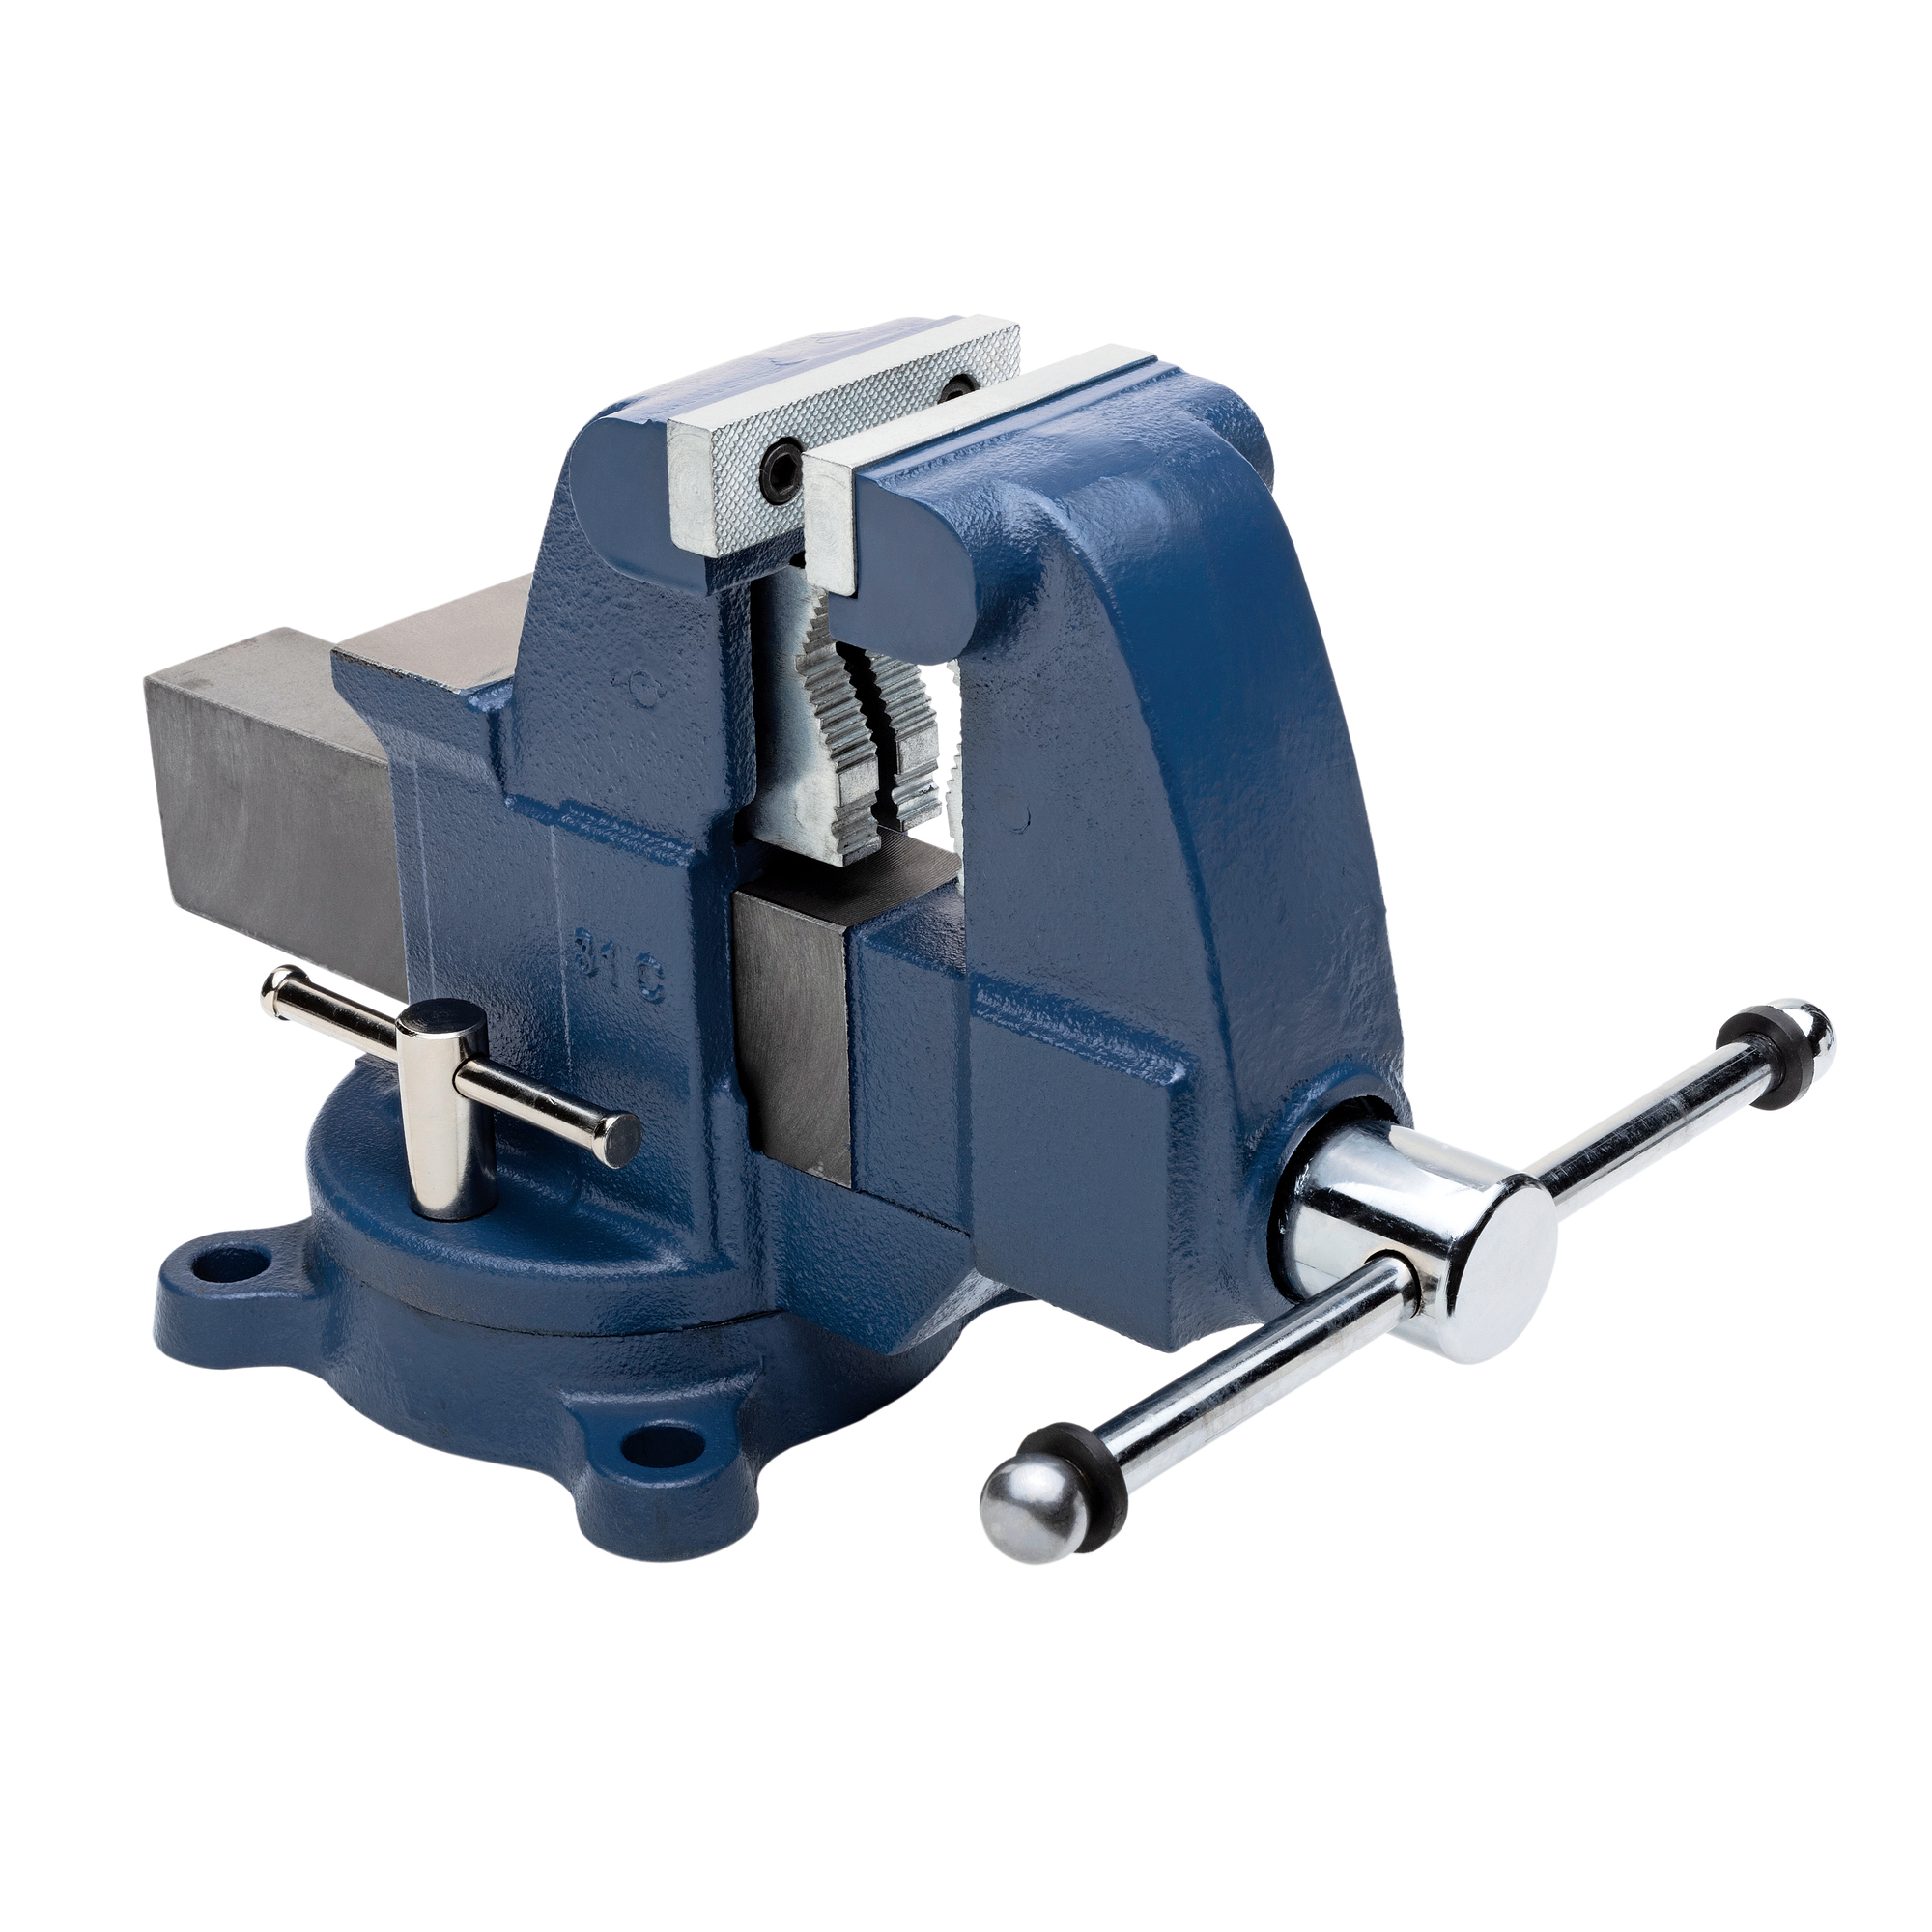 Yost Vises, 3.5Inch HD Combo Vise, Jaw Width 3.5 in, Jaw Capacity 4 in, Material Ductile Iron, Model 31C